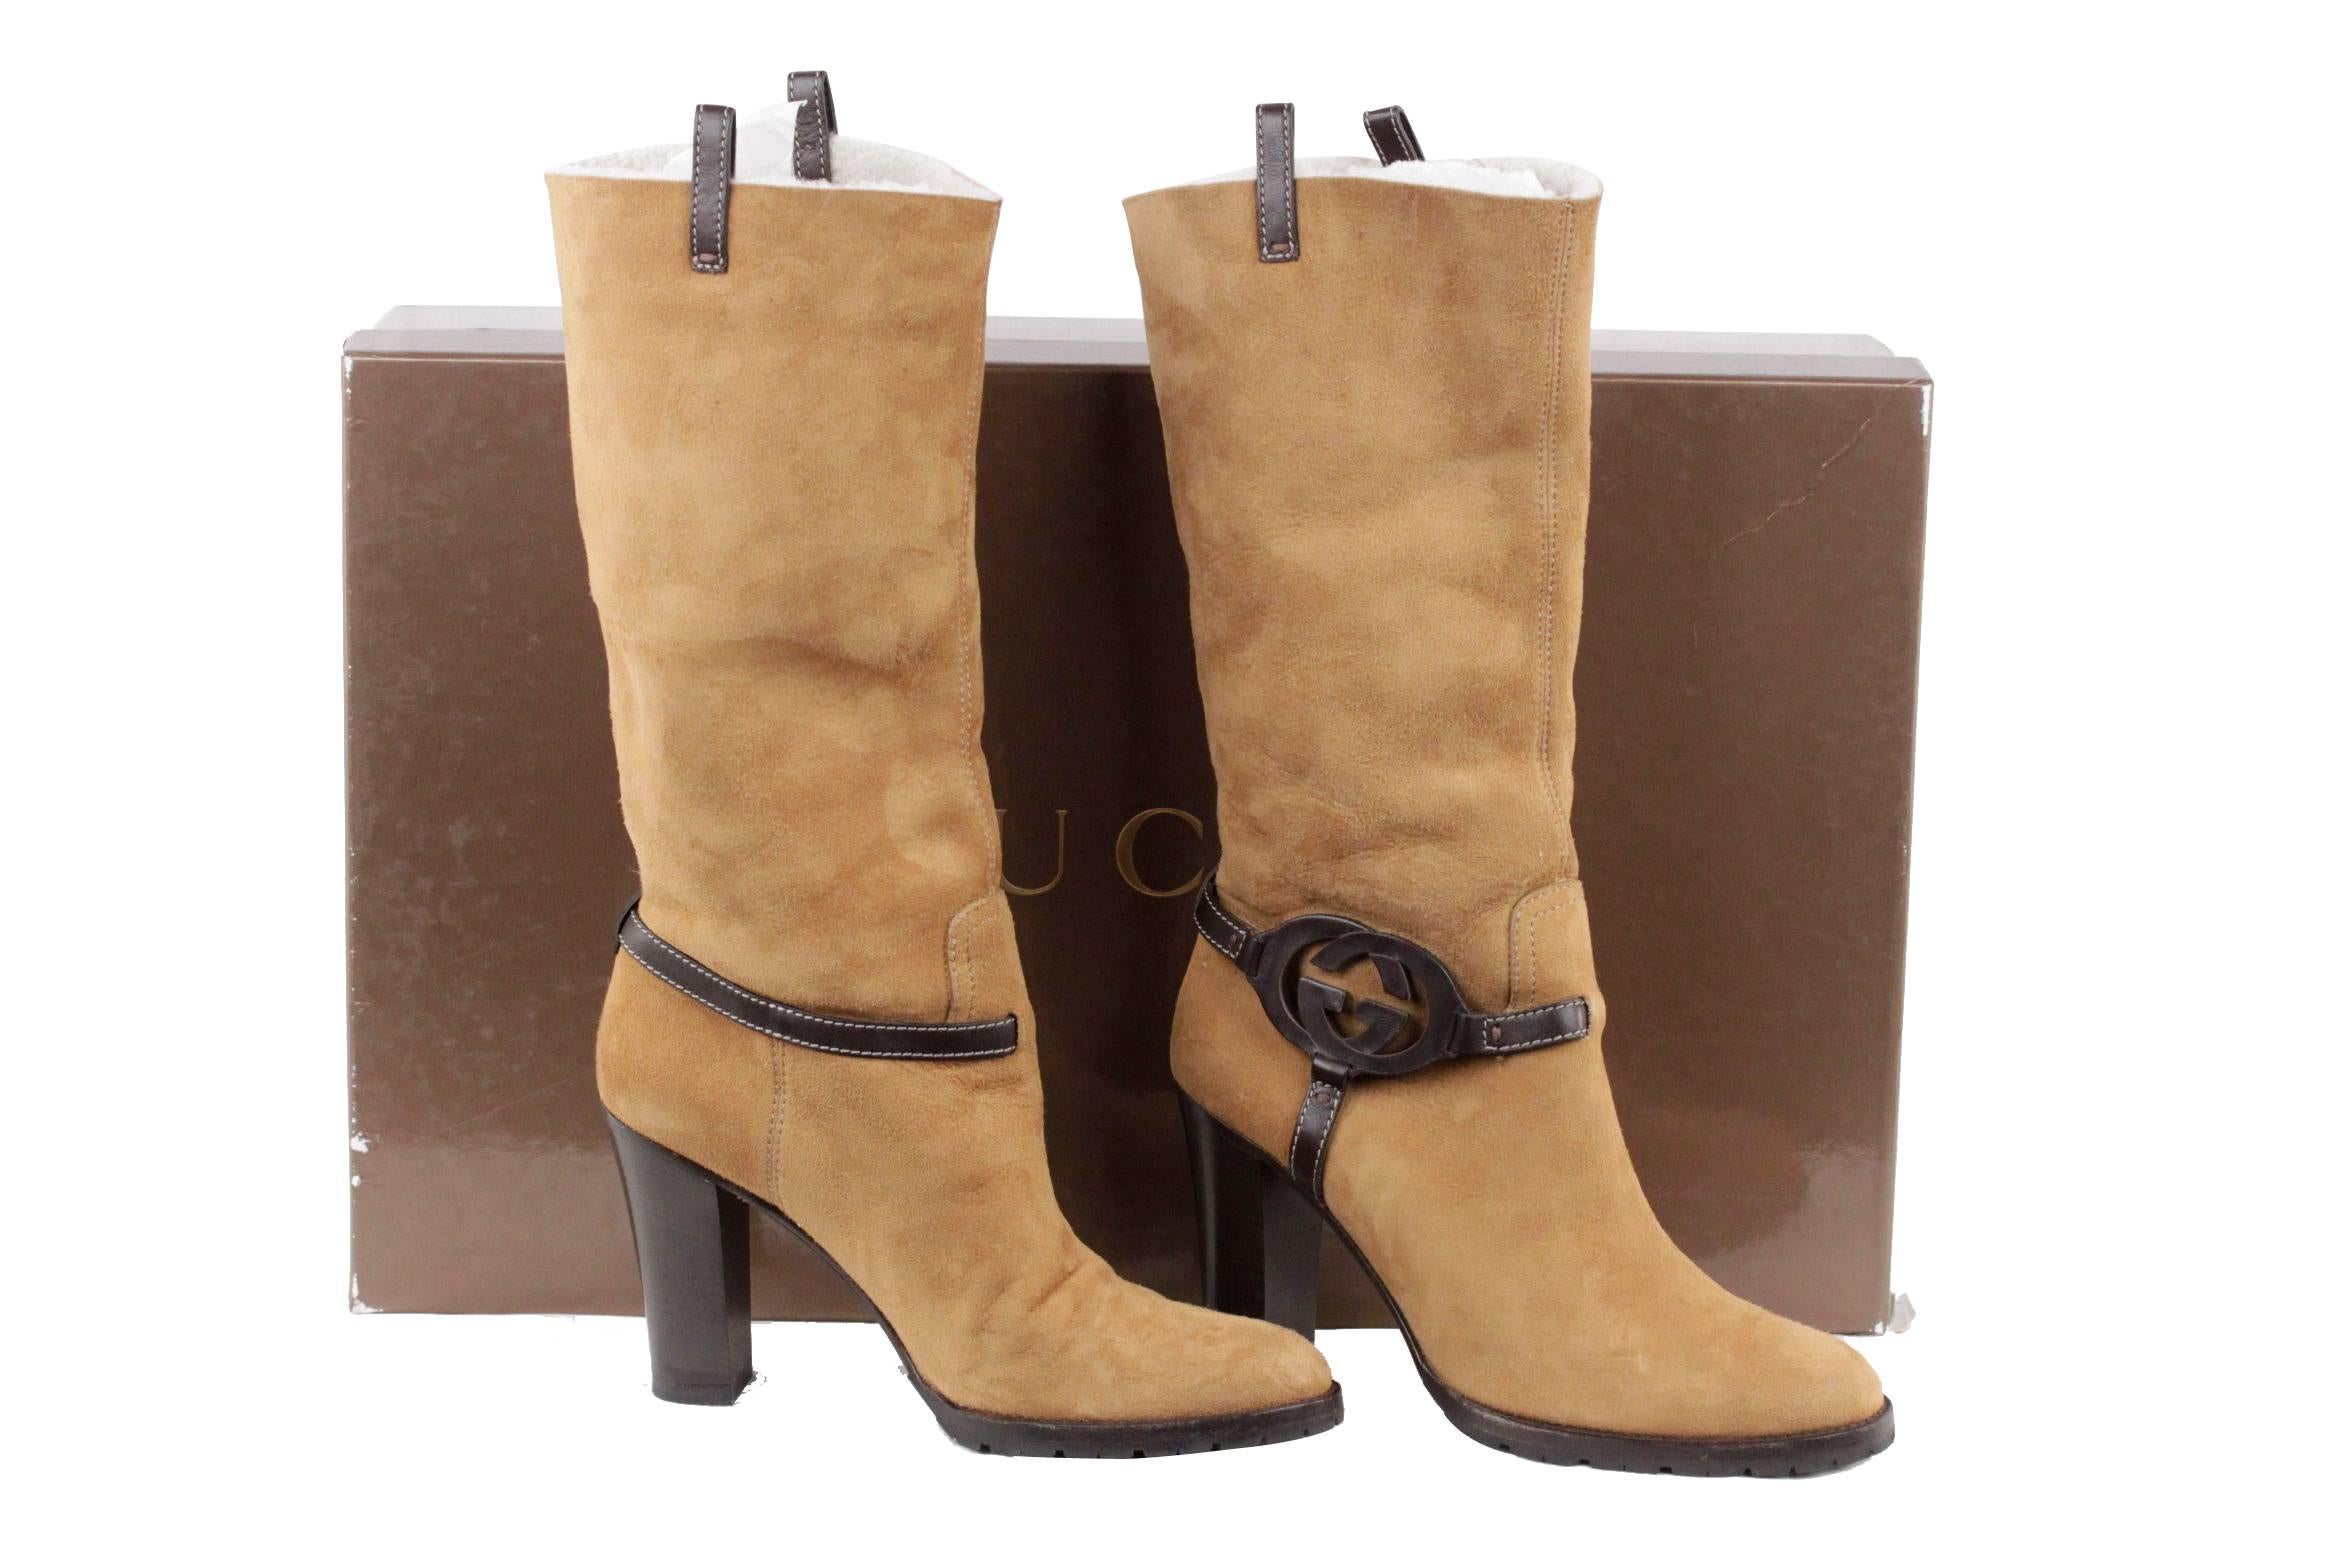 
- Tan suede heeled boots by GUCCI
- Round toe
- GG - GUCCi logo detailing on the sides
- Rubber lug sole
- Pull tabs at top sides for easy pull-on
- 4 inches - 10,2 cm chunky stacked heels

Brand: GUCCI - made in Italy

Condition (please